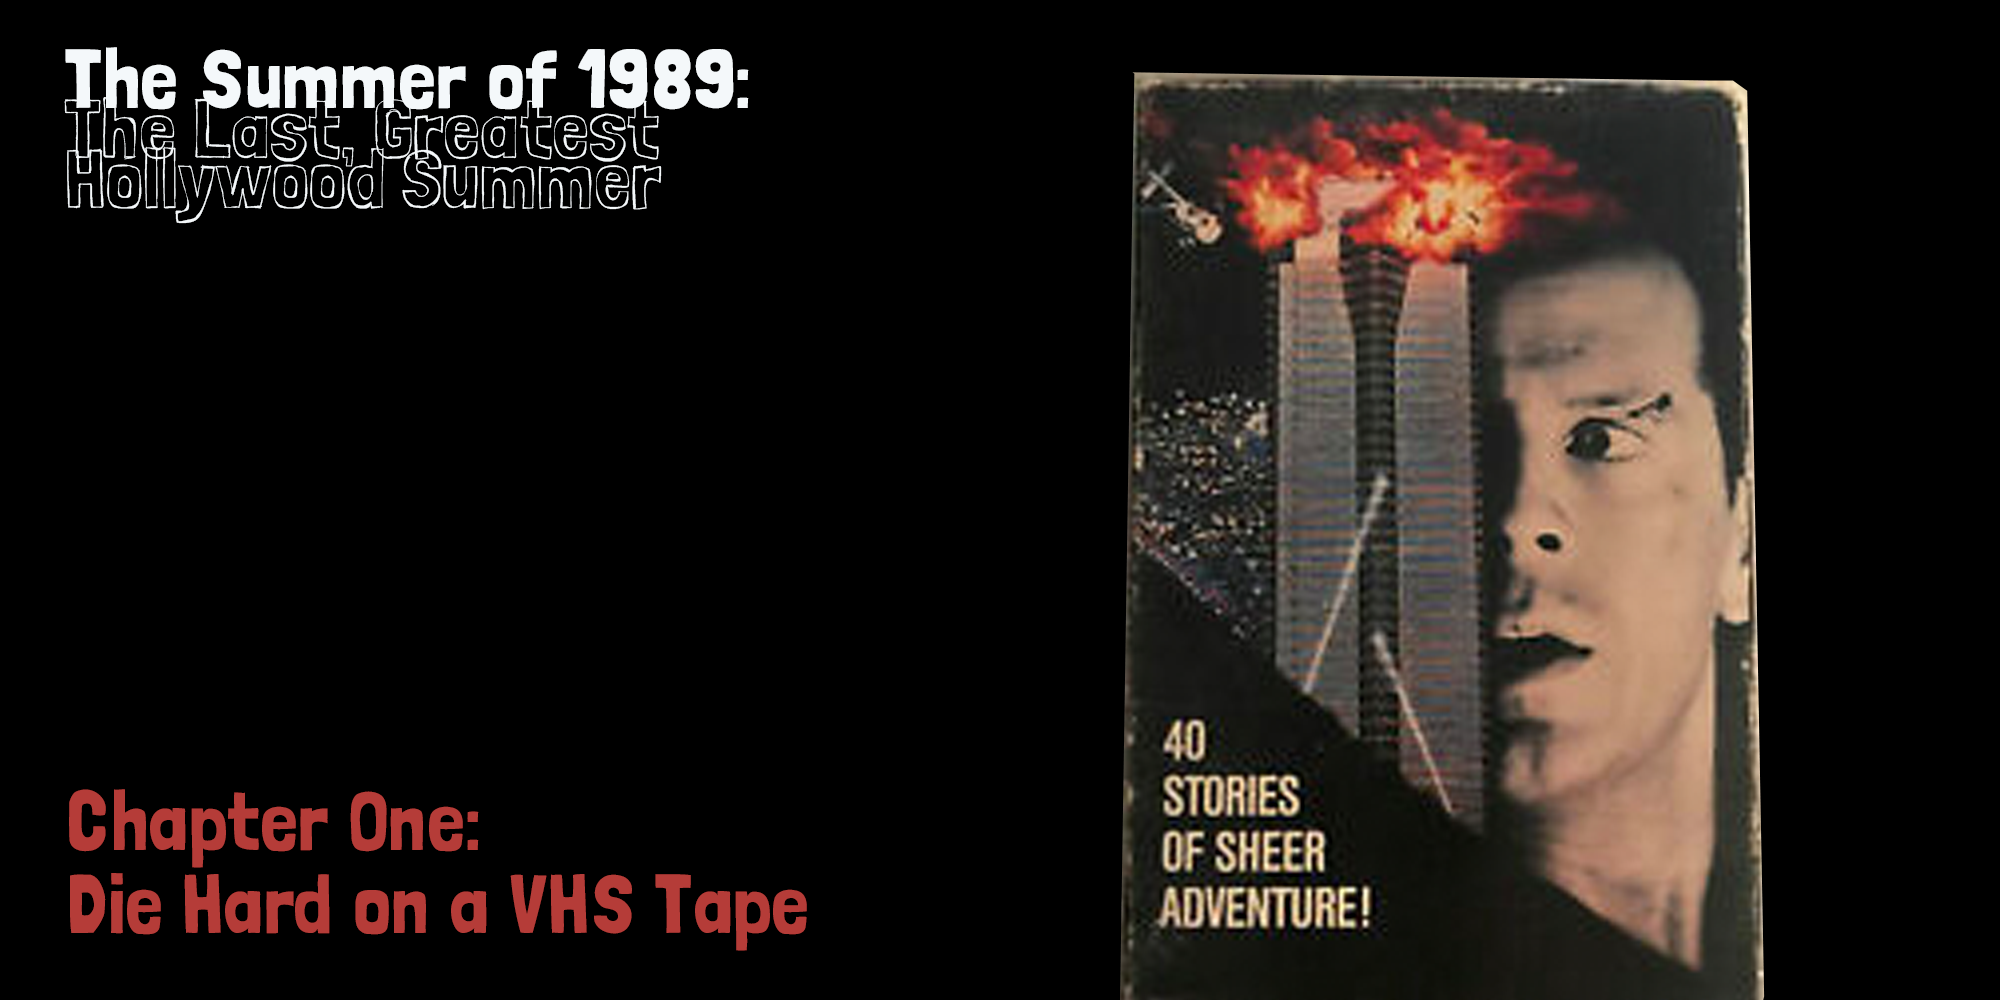 The Last Greatest Hollywood Summer: Die Hard on a VHS Tape 